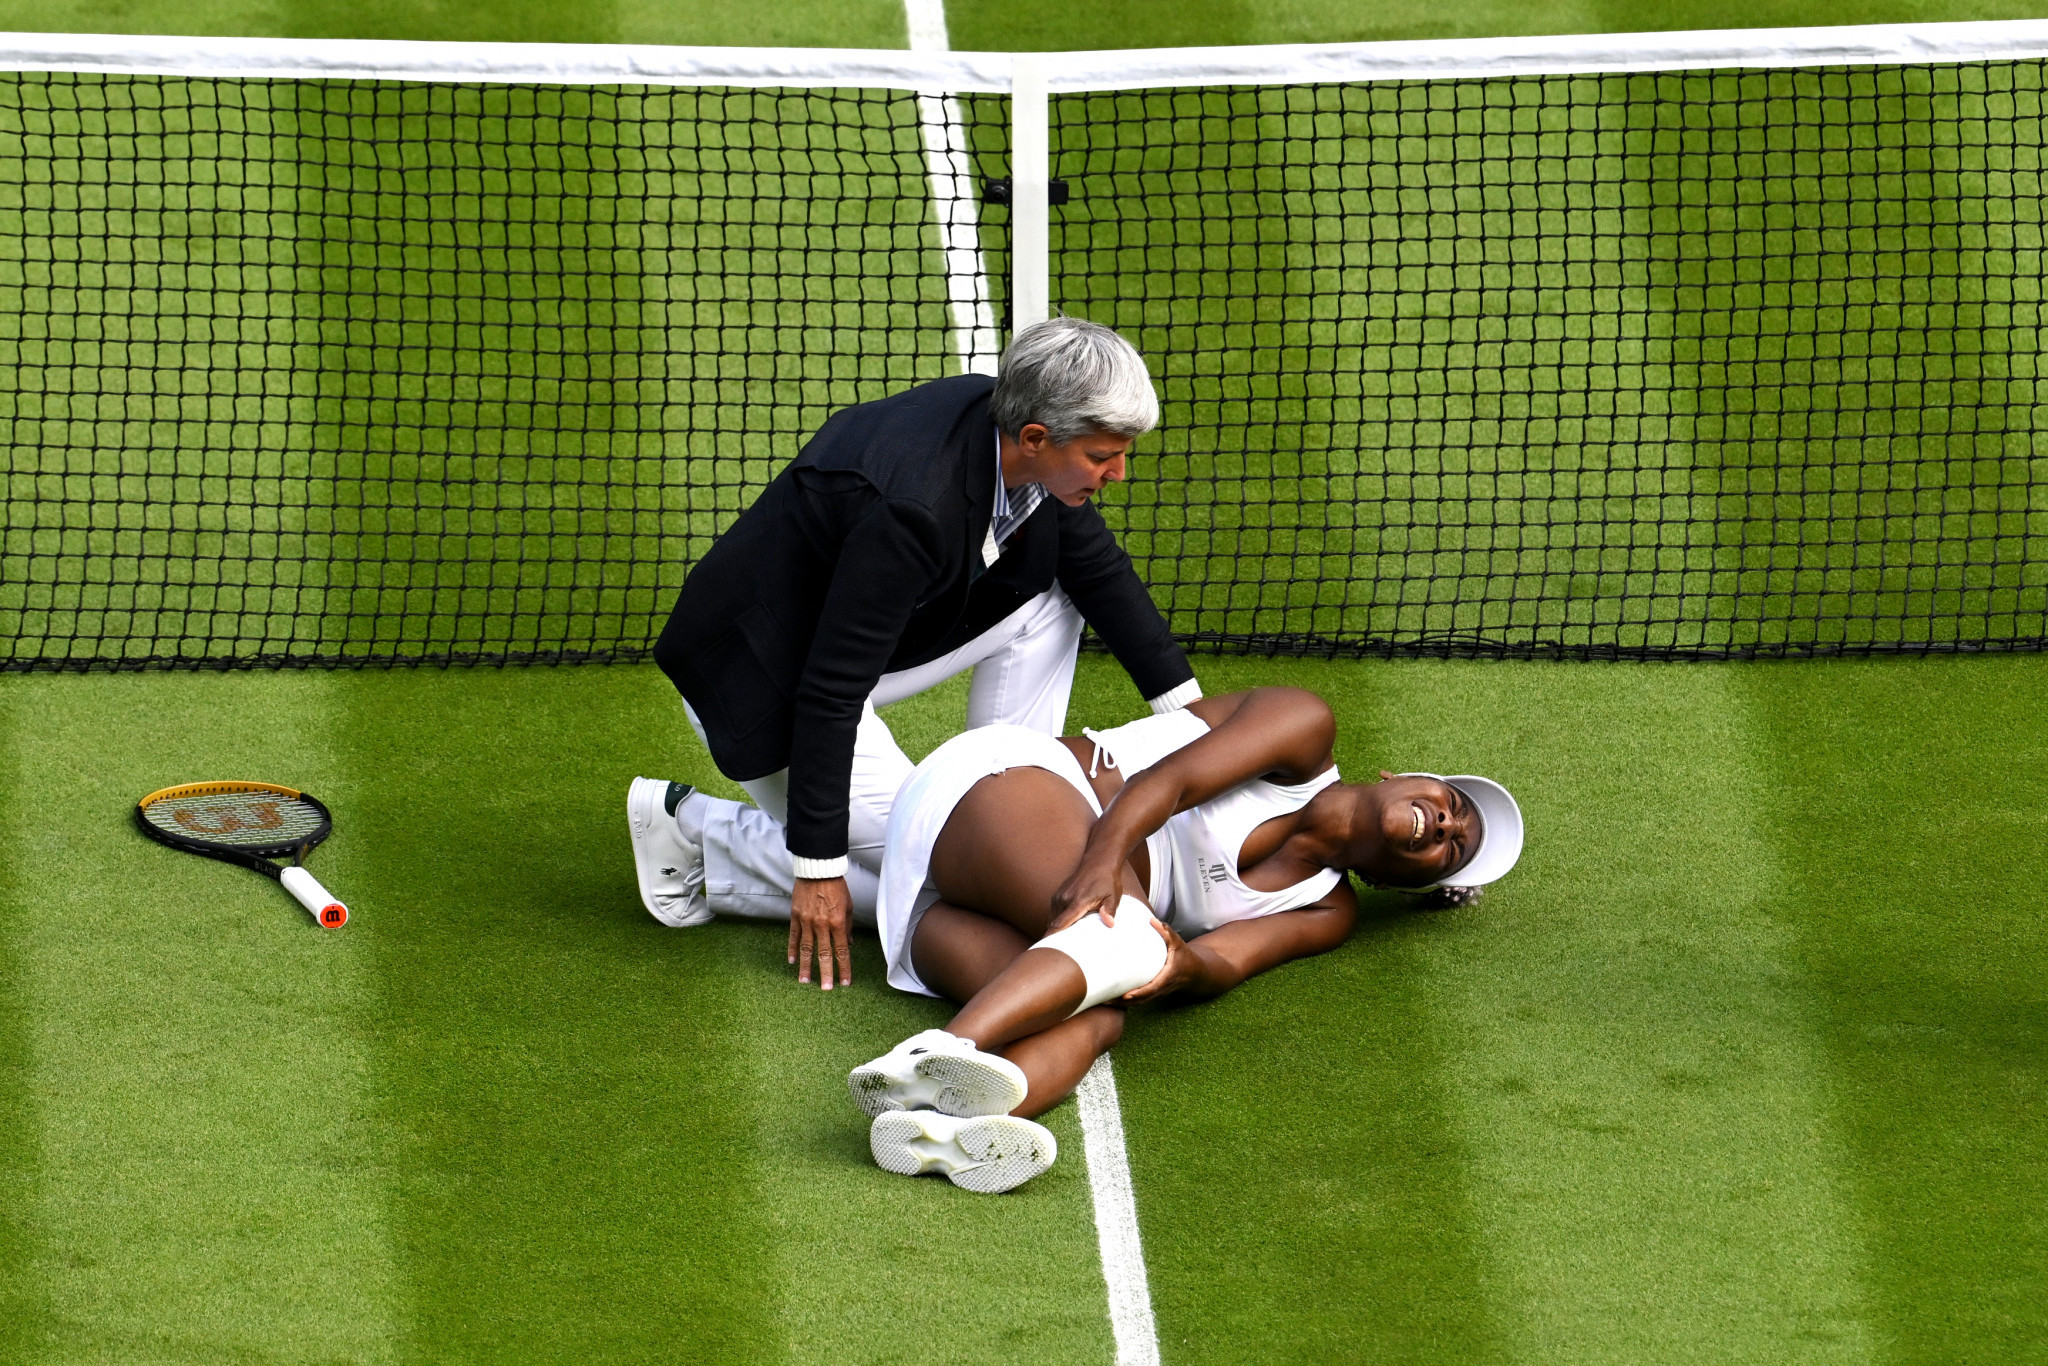 Venus Williams is comforted by the umpire after a nasty fall during her match at Wimbledon against fellow wildcard Elina Svitolina ©Getty Images